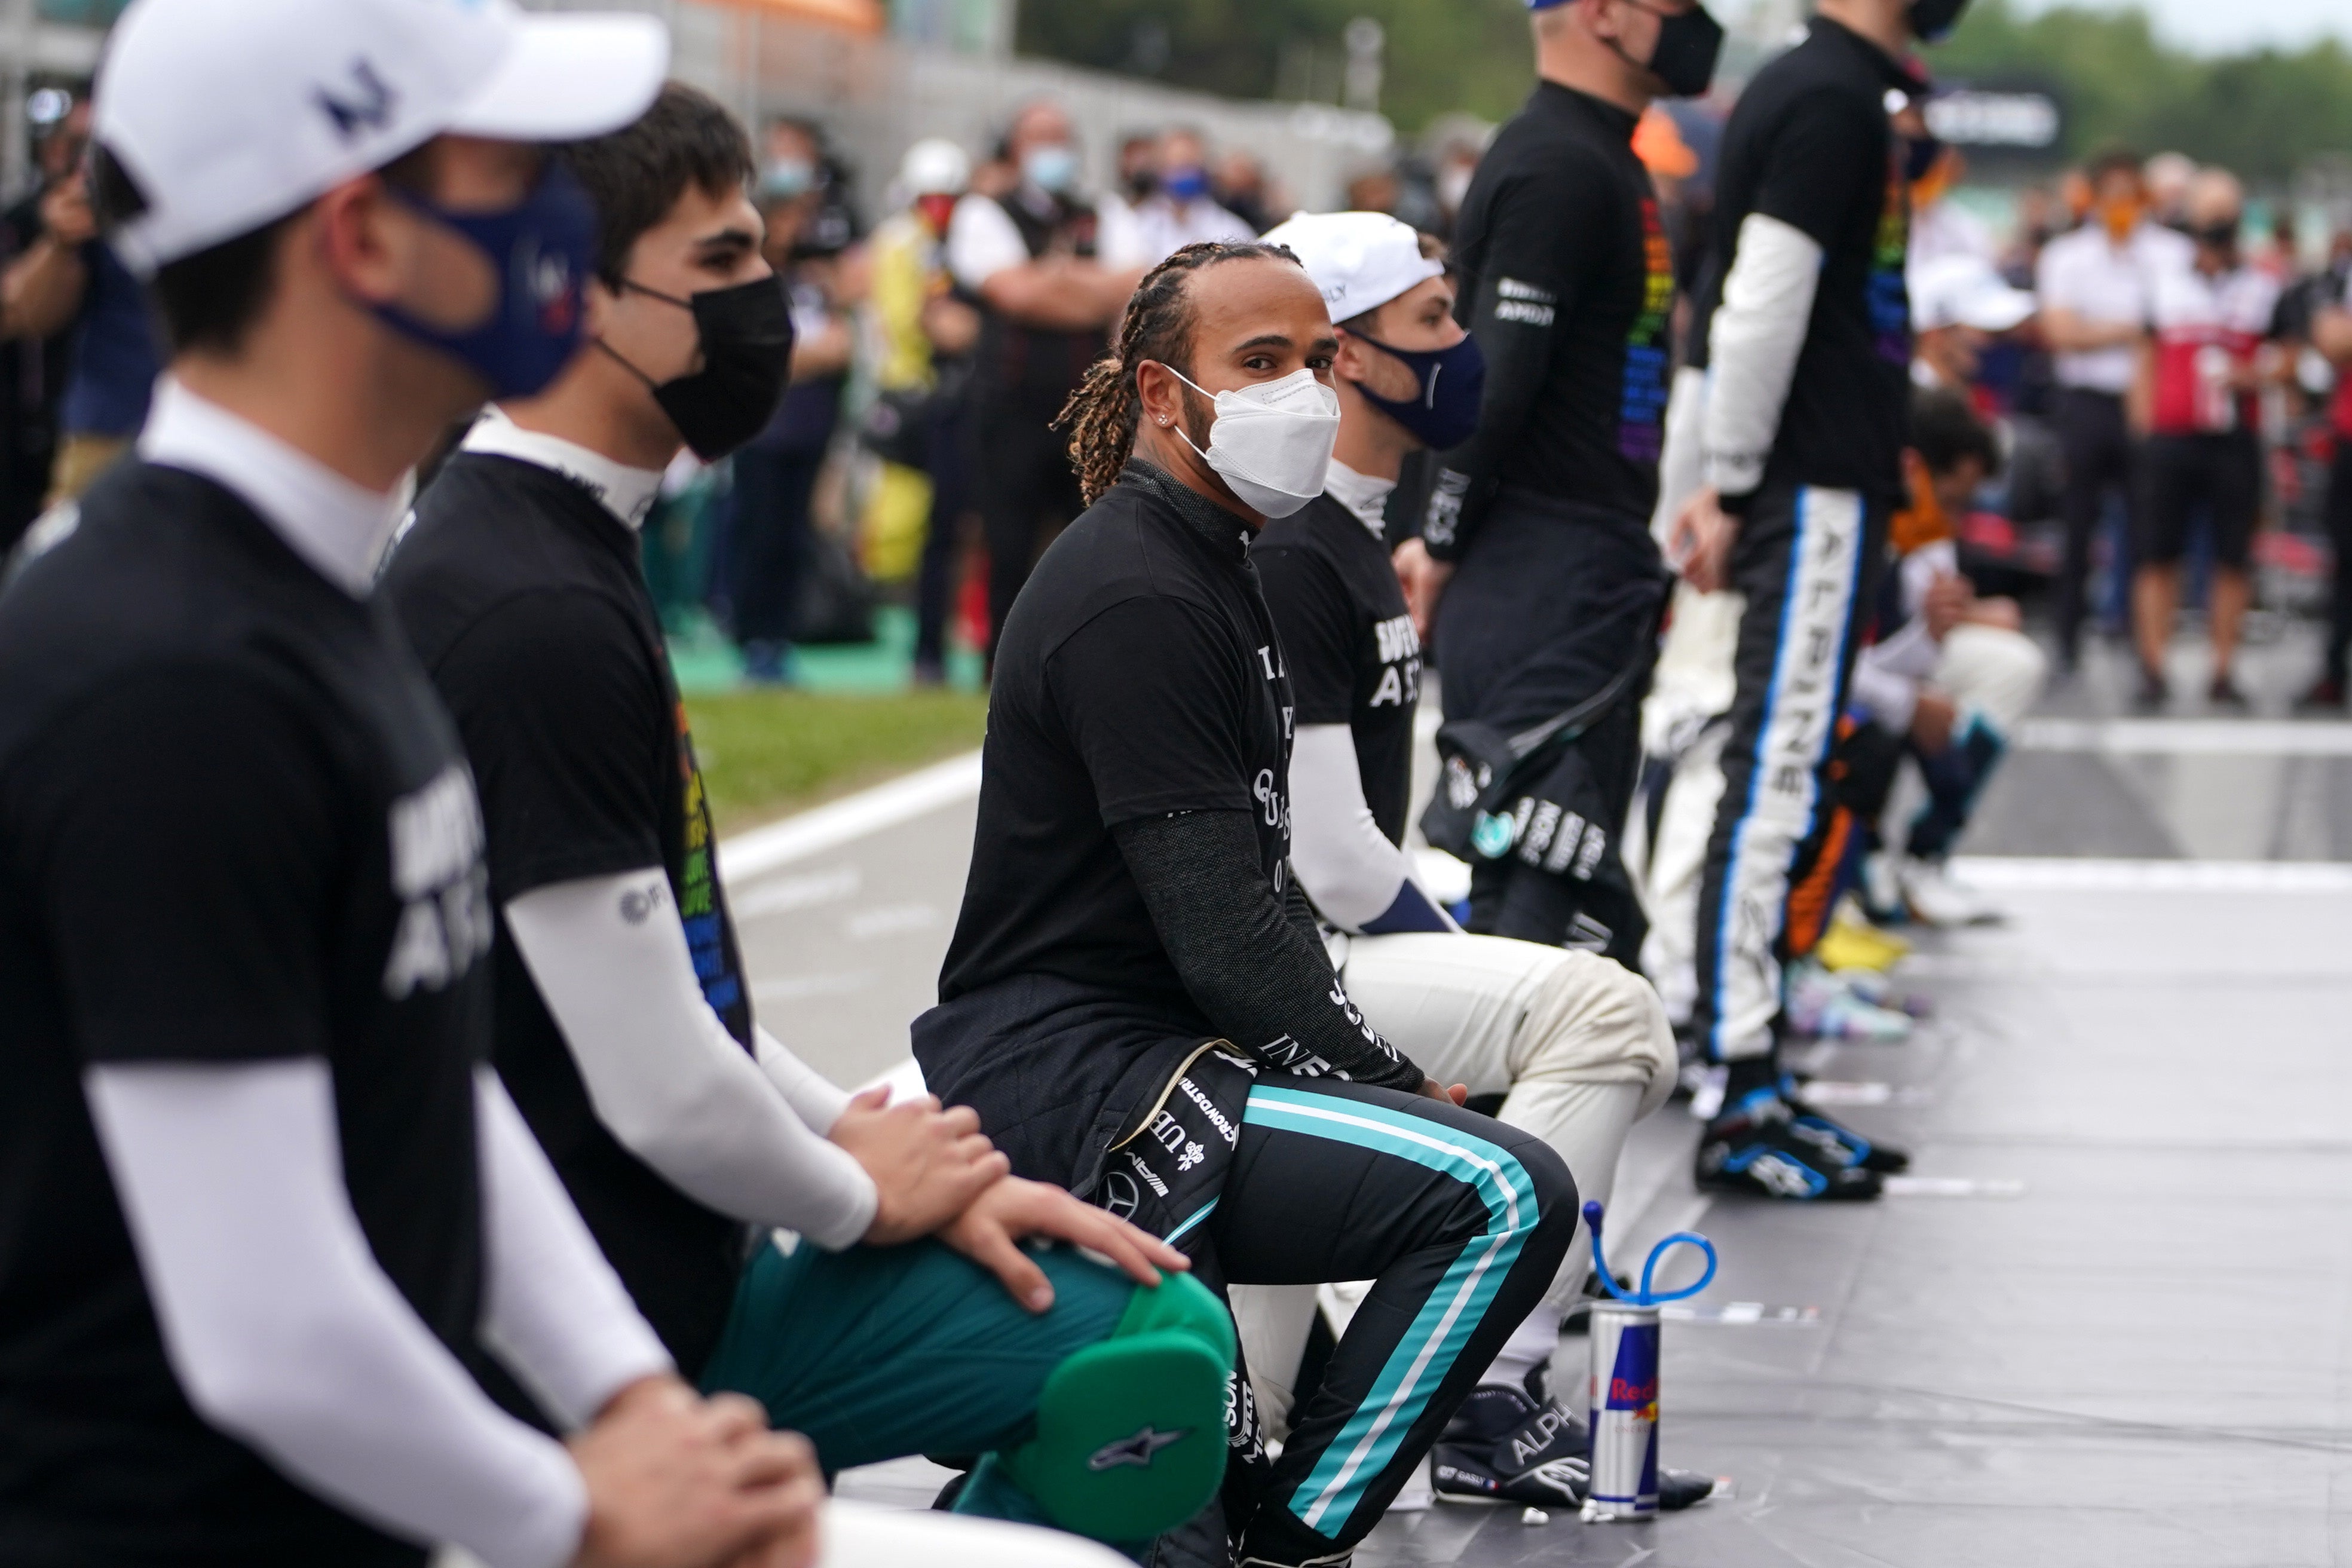 Drivers have taken the knee before races in a stand against racism